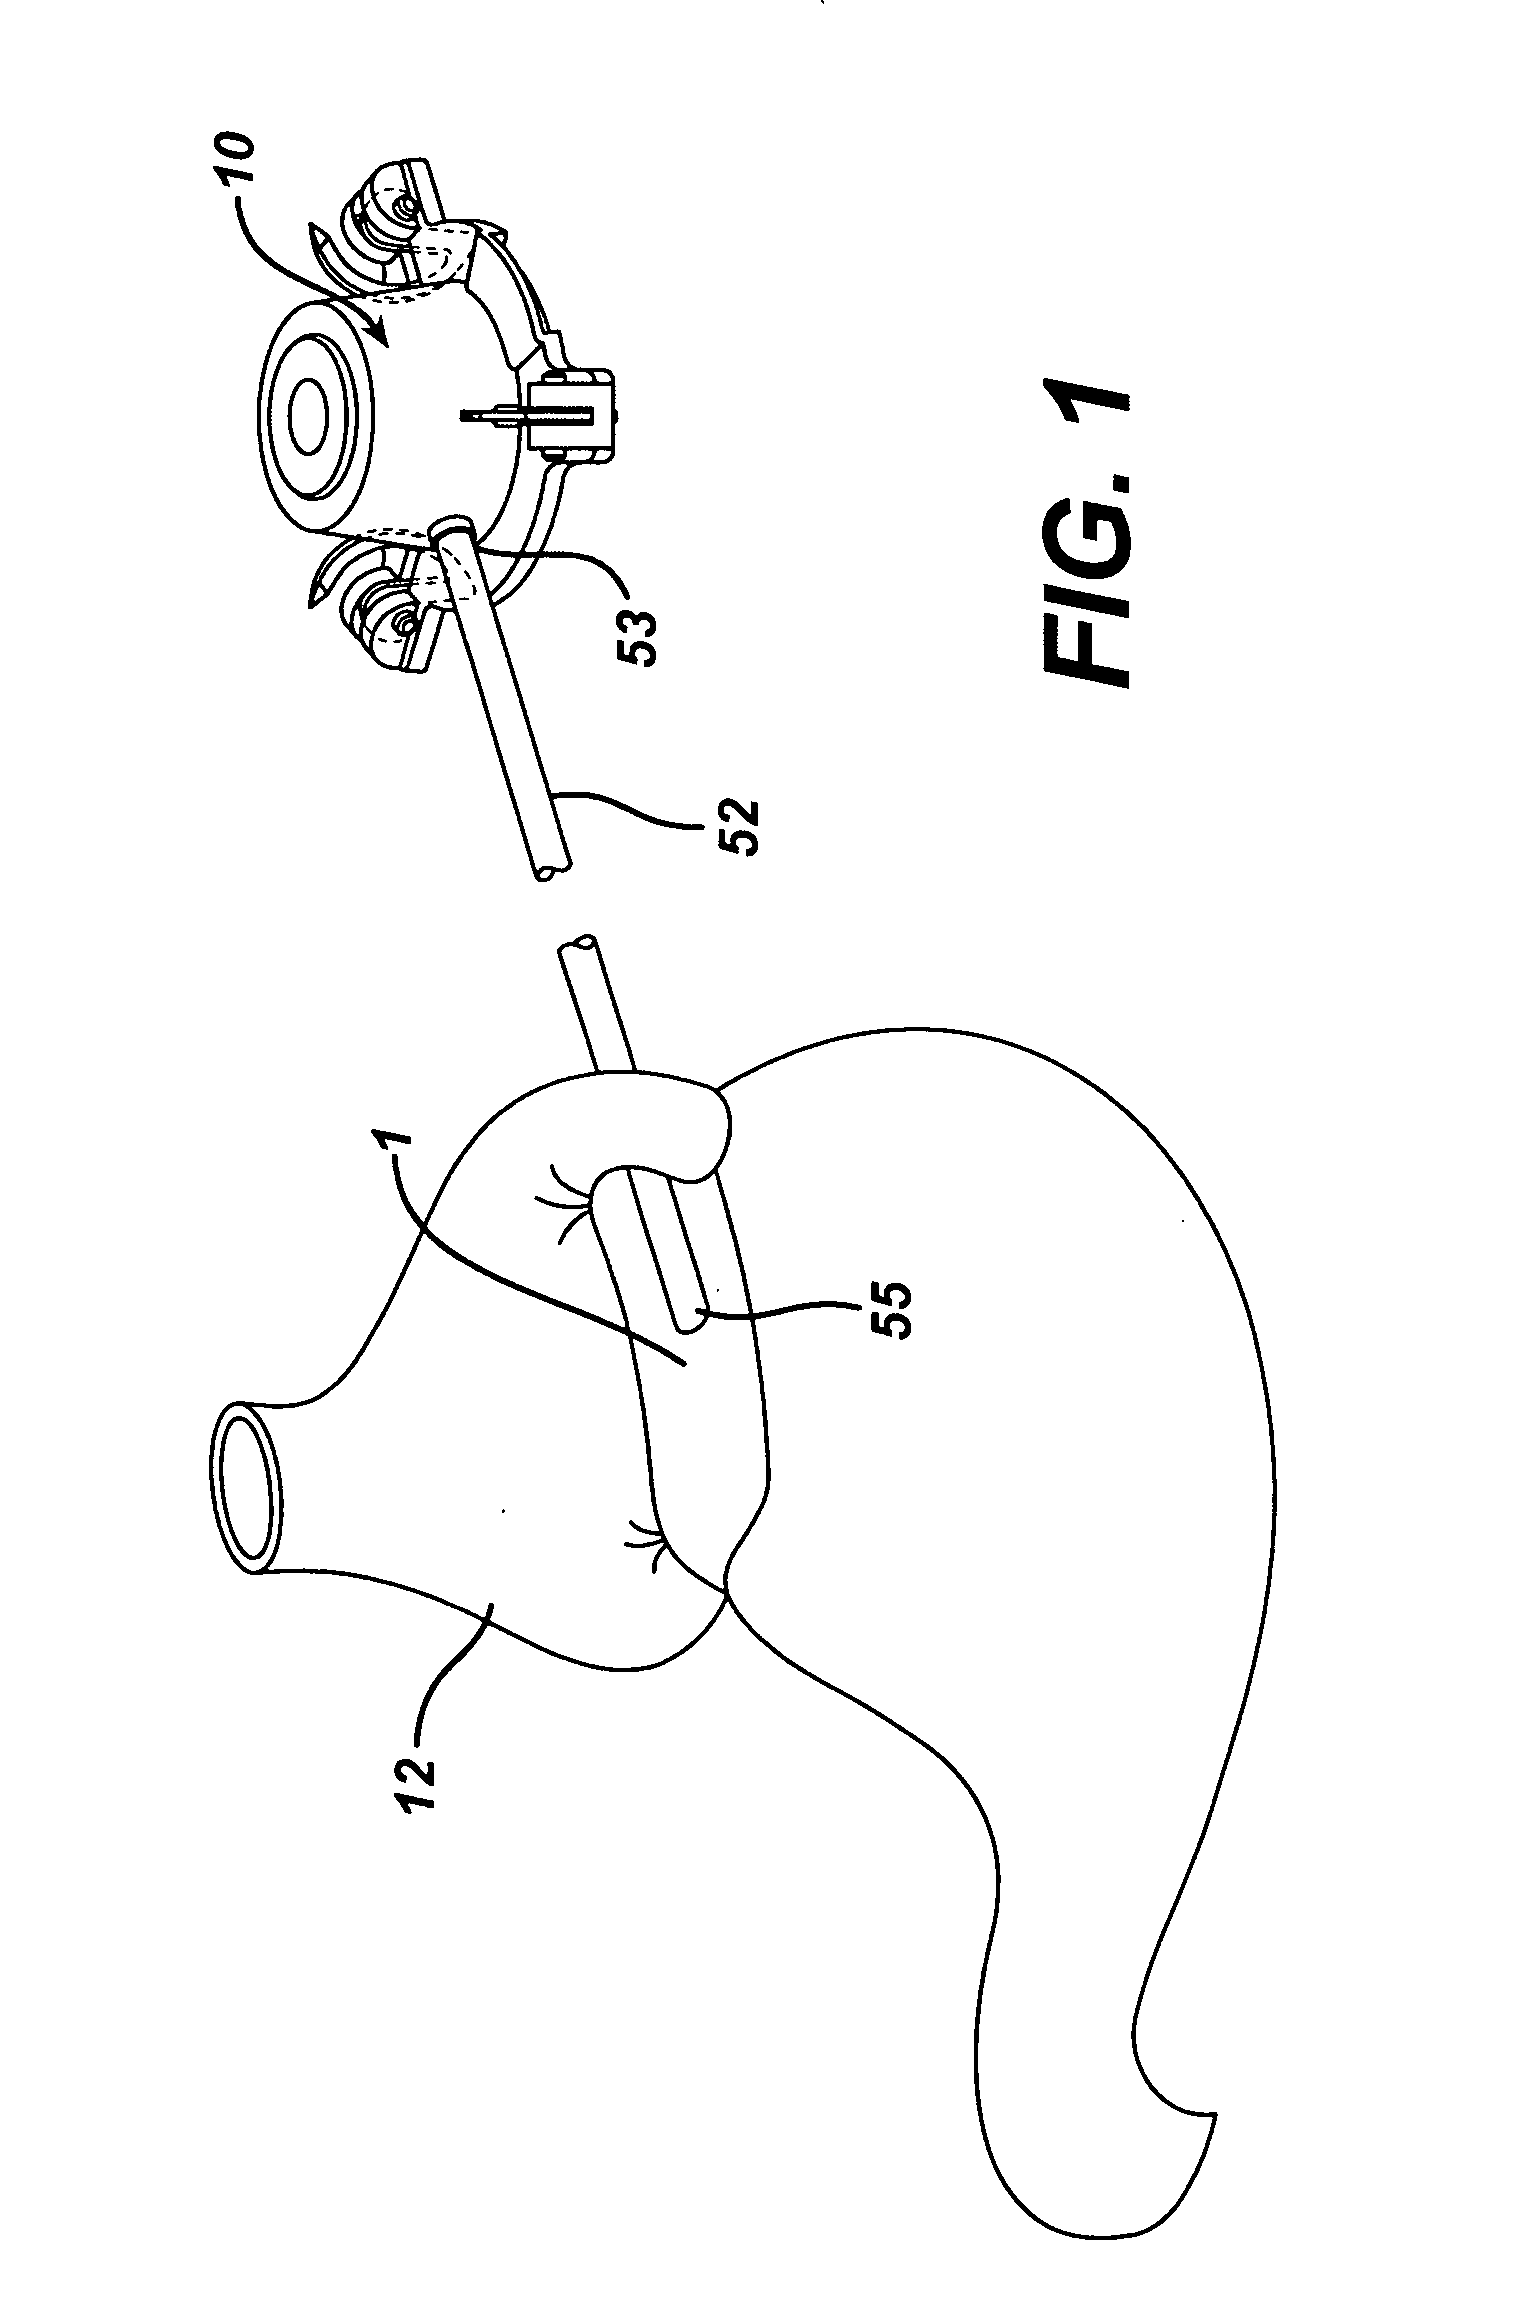 Surgically implantable injection port having an absorbable fastener